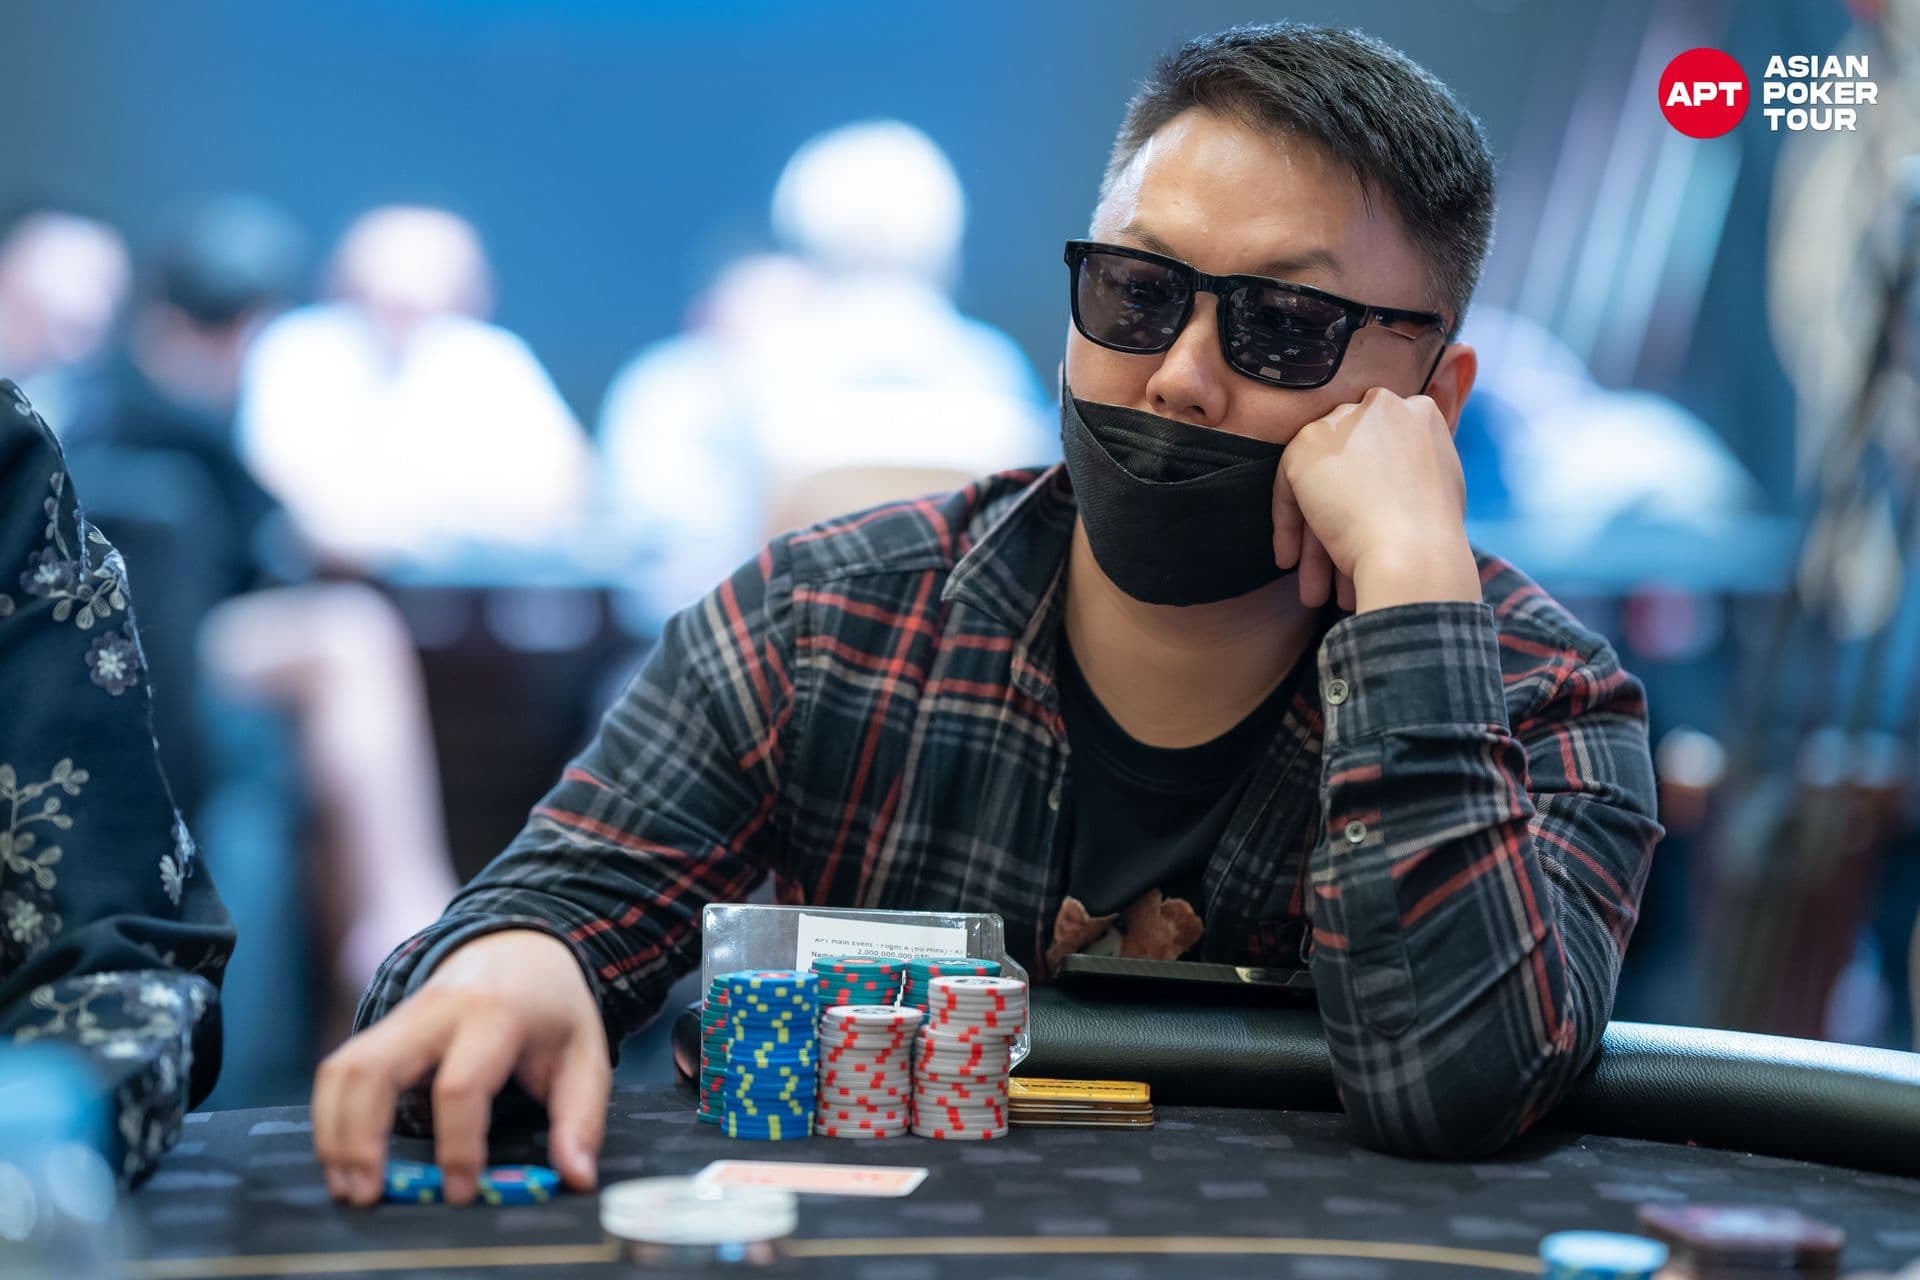 Russia's Sergei Kim Leads Final 15 Main Event Players in Korea's Largest-Ever Tournament